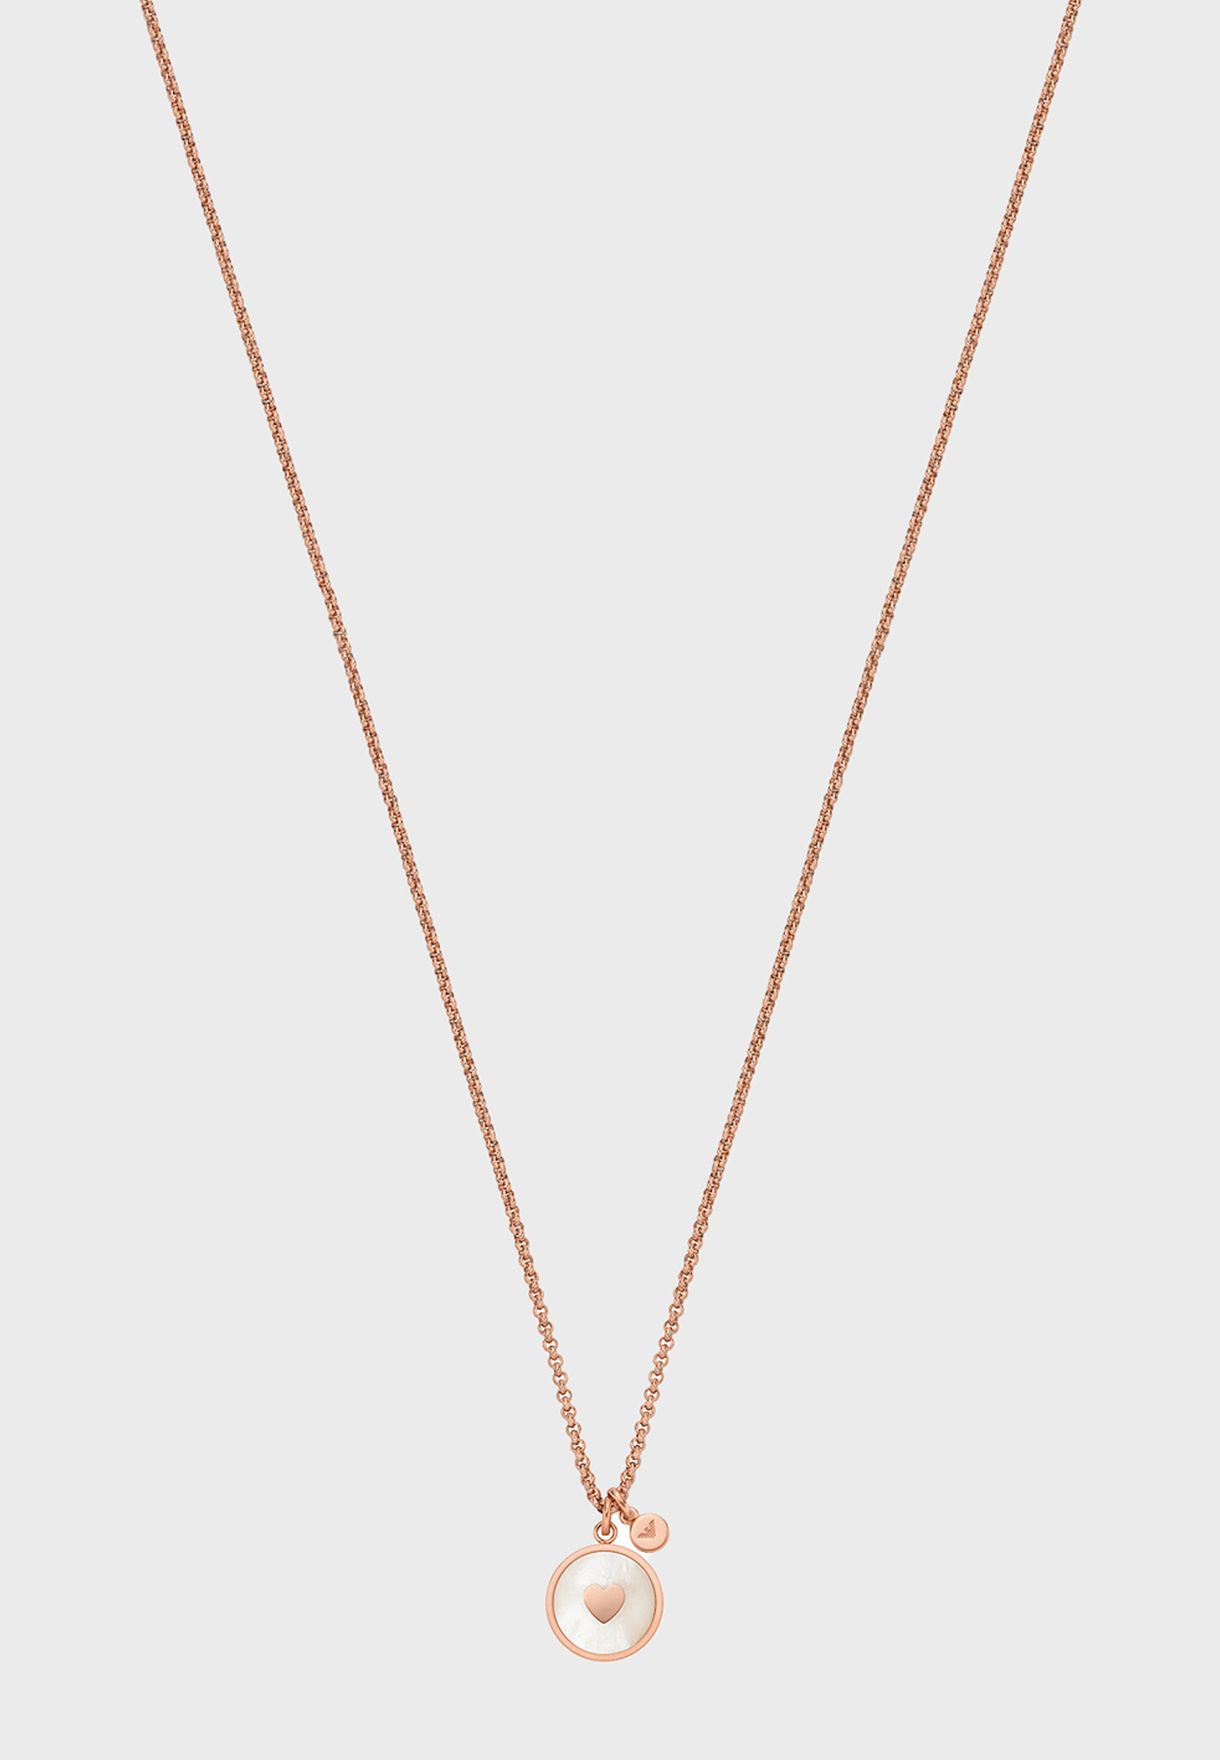 Egs2903221 Choker Necklace